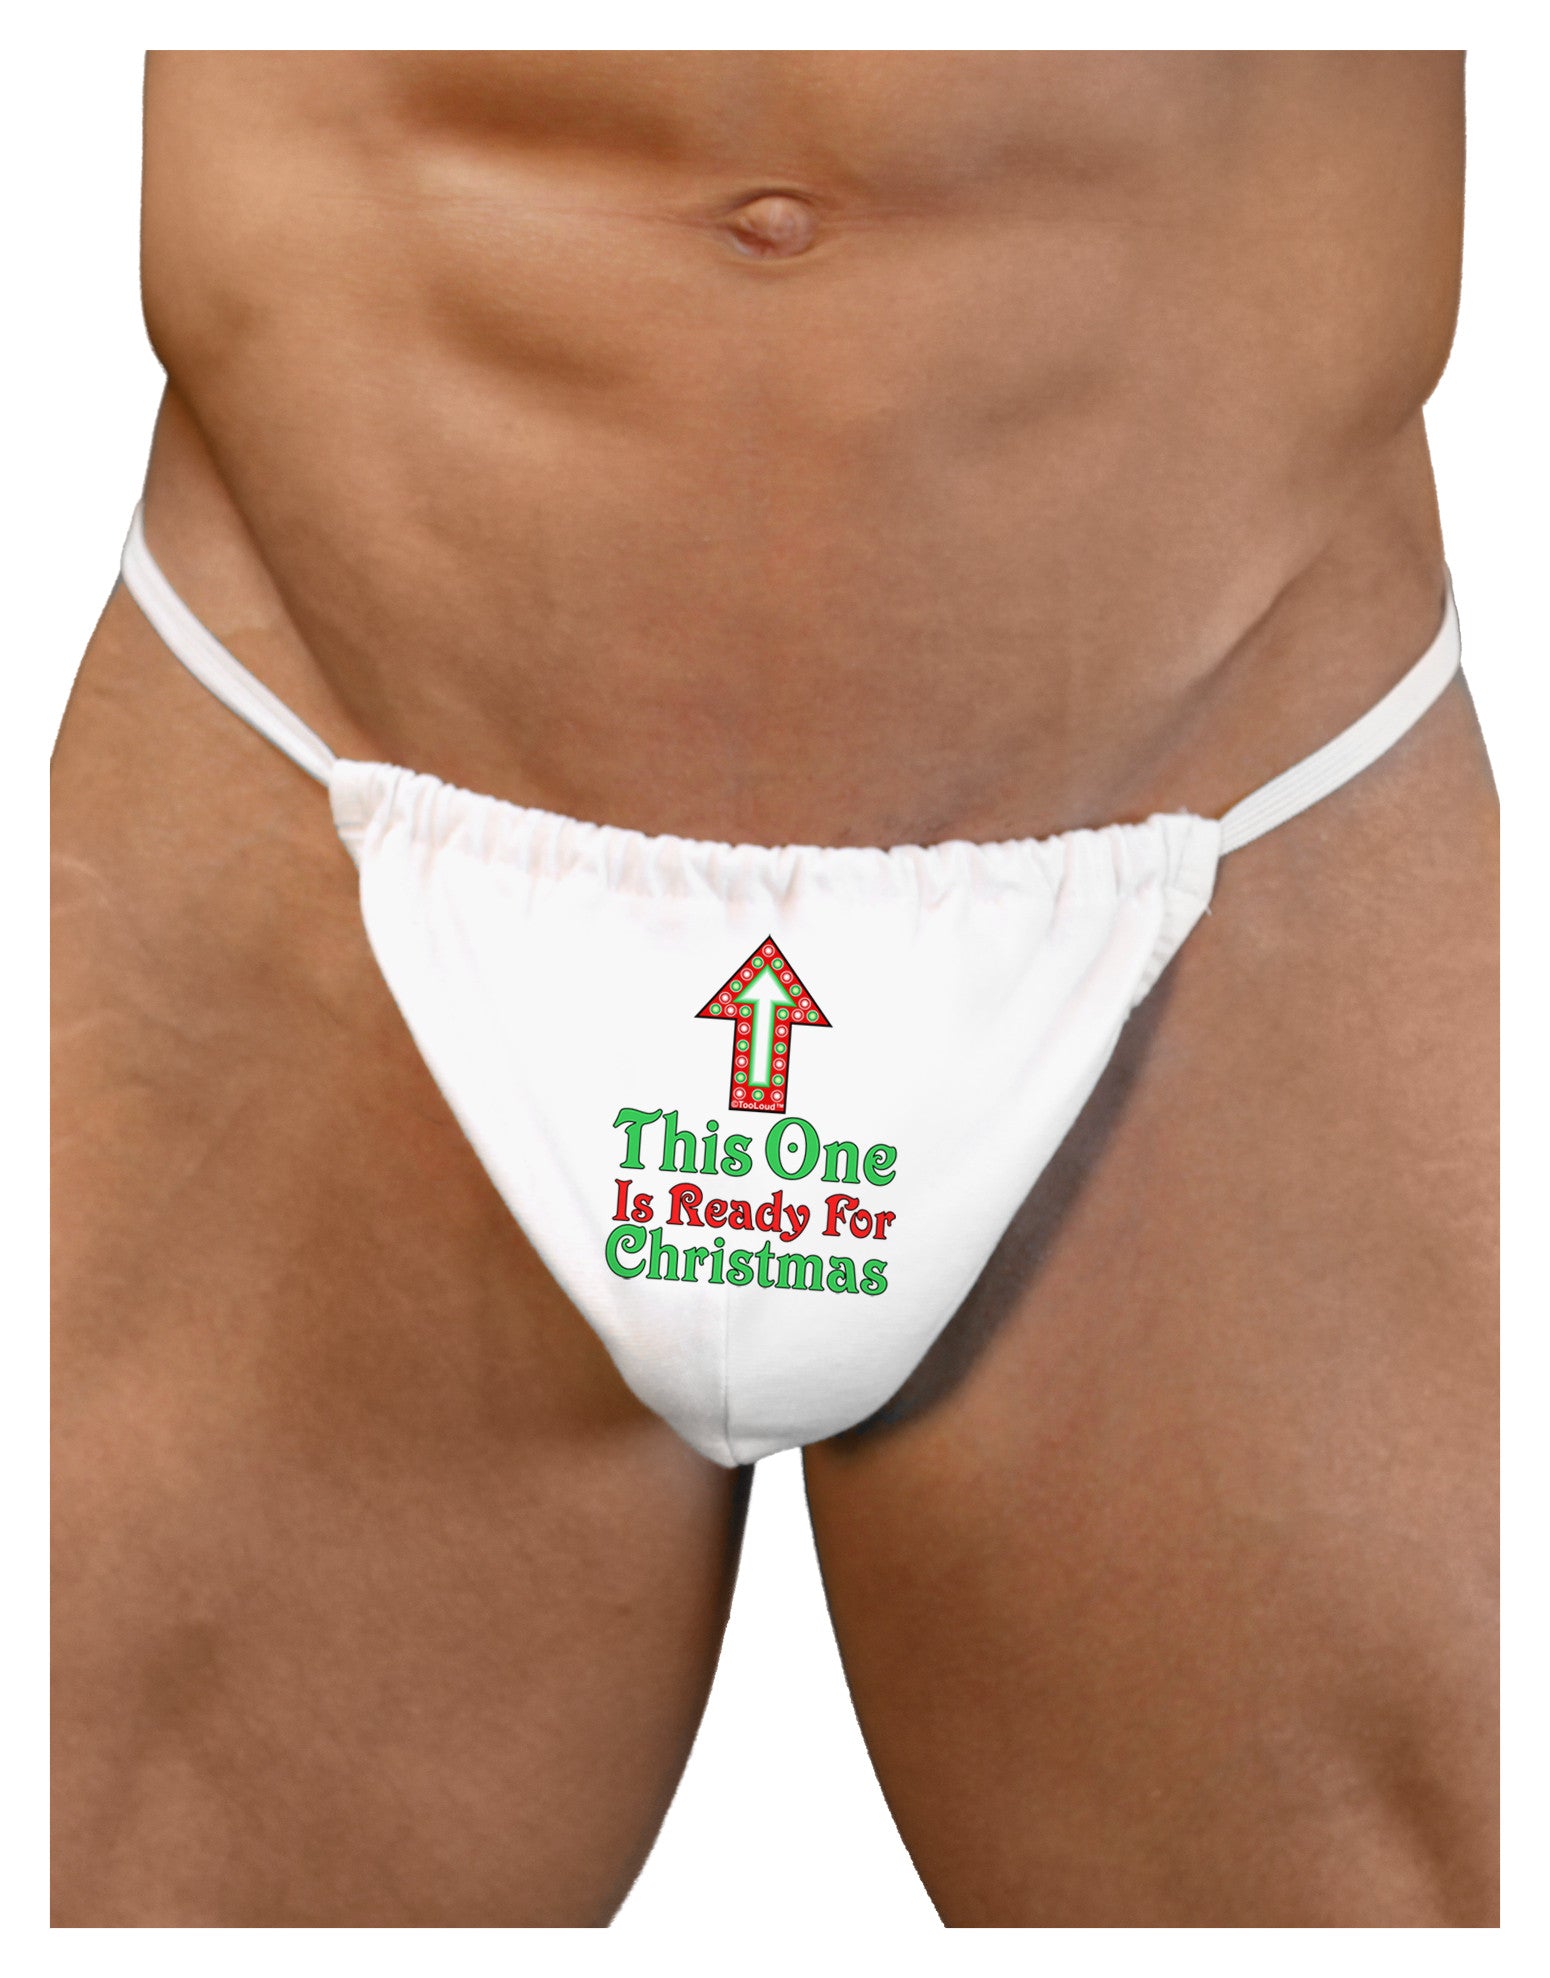 This One Is Ready For Christmas Mens G-String Underwear